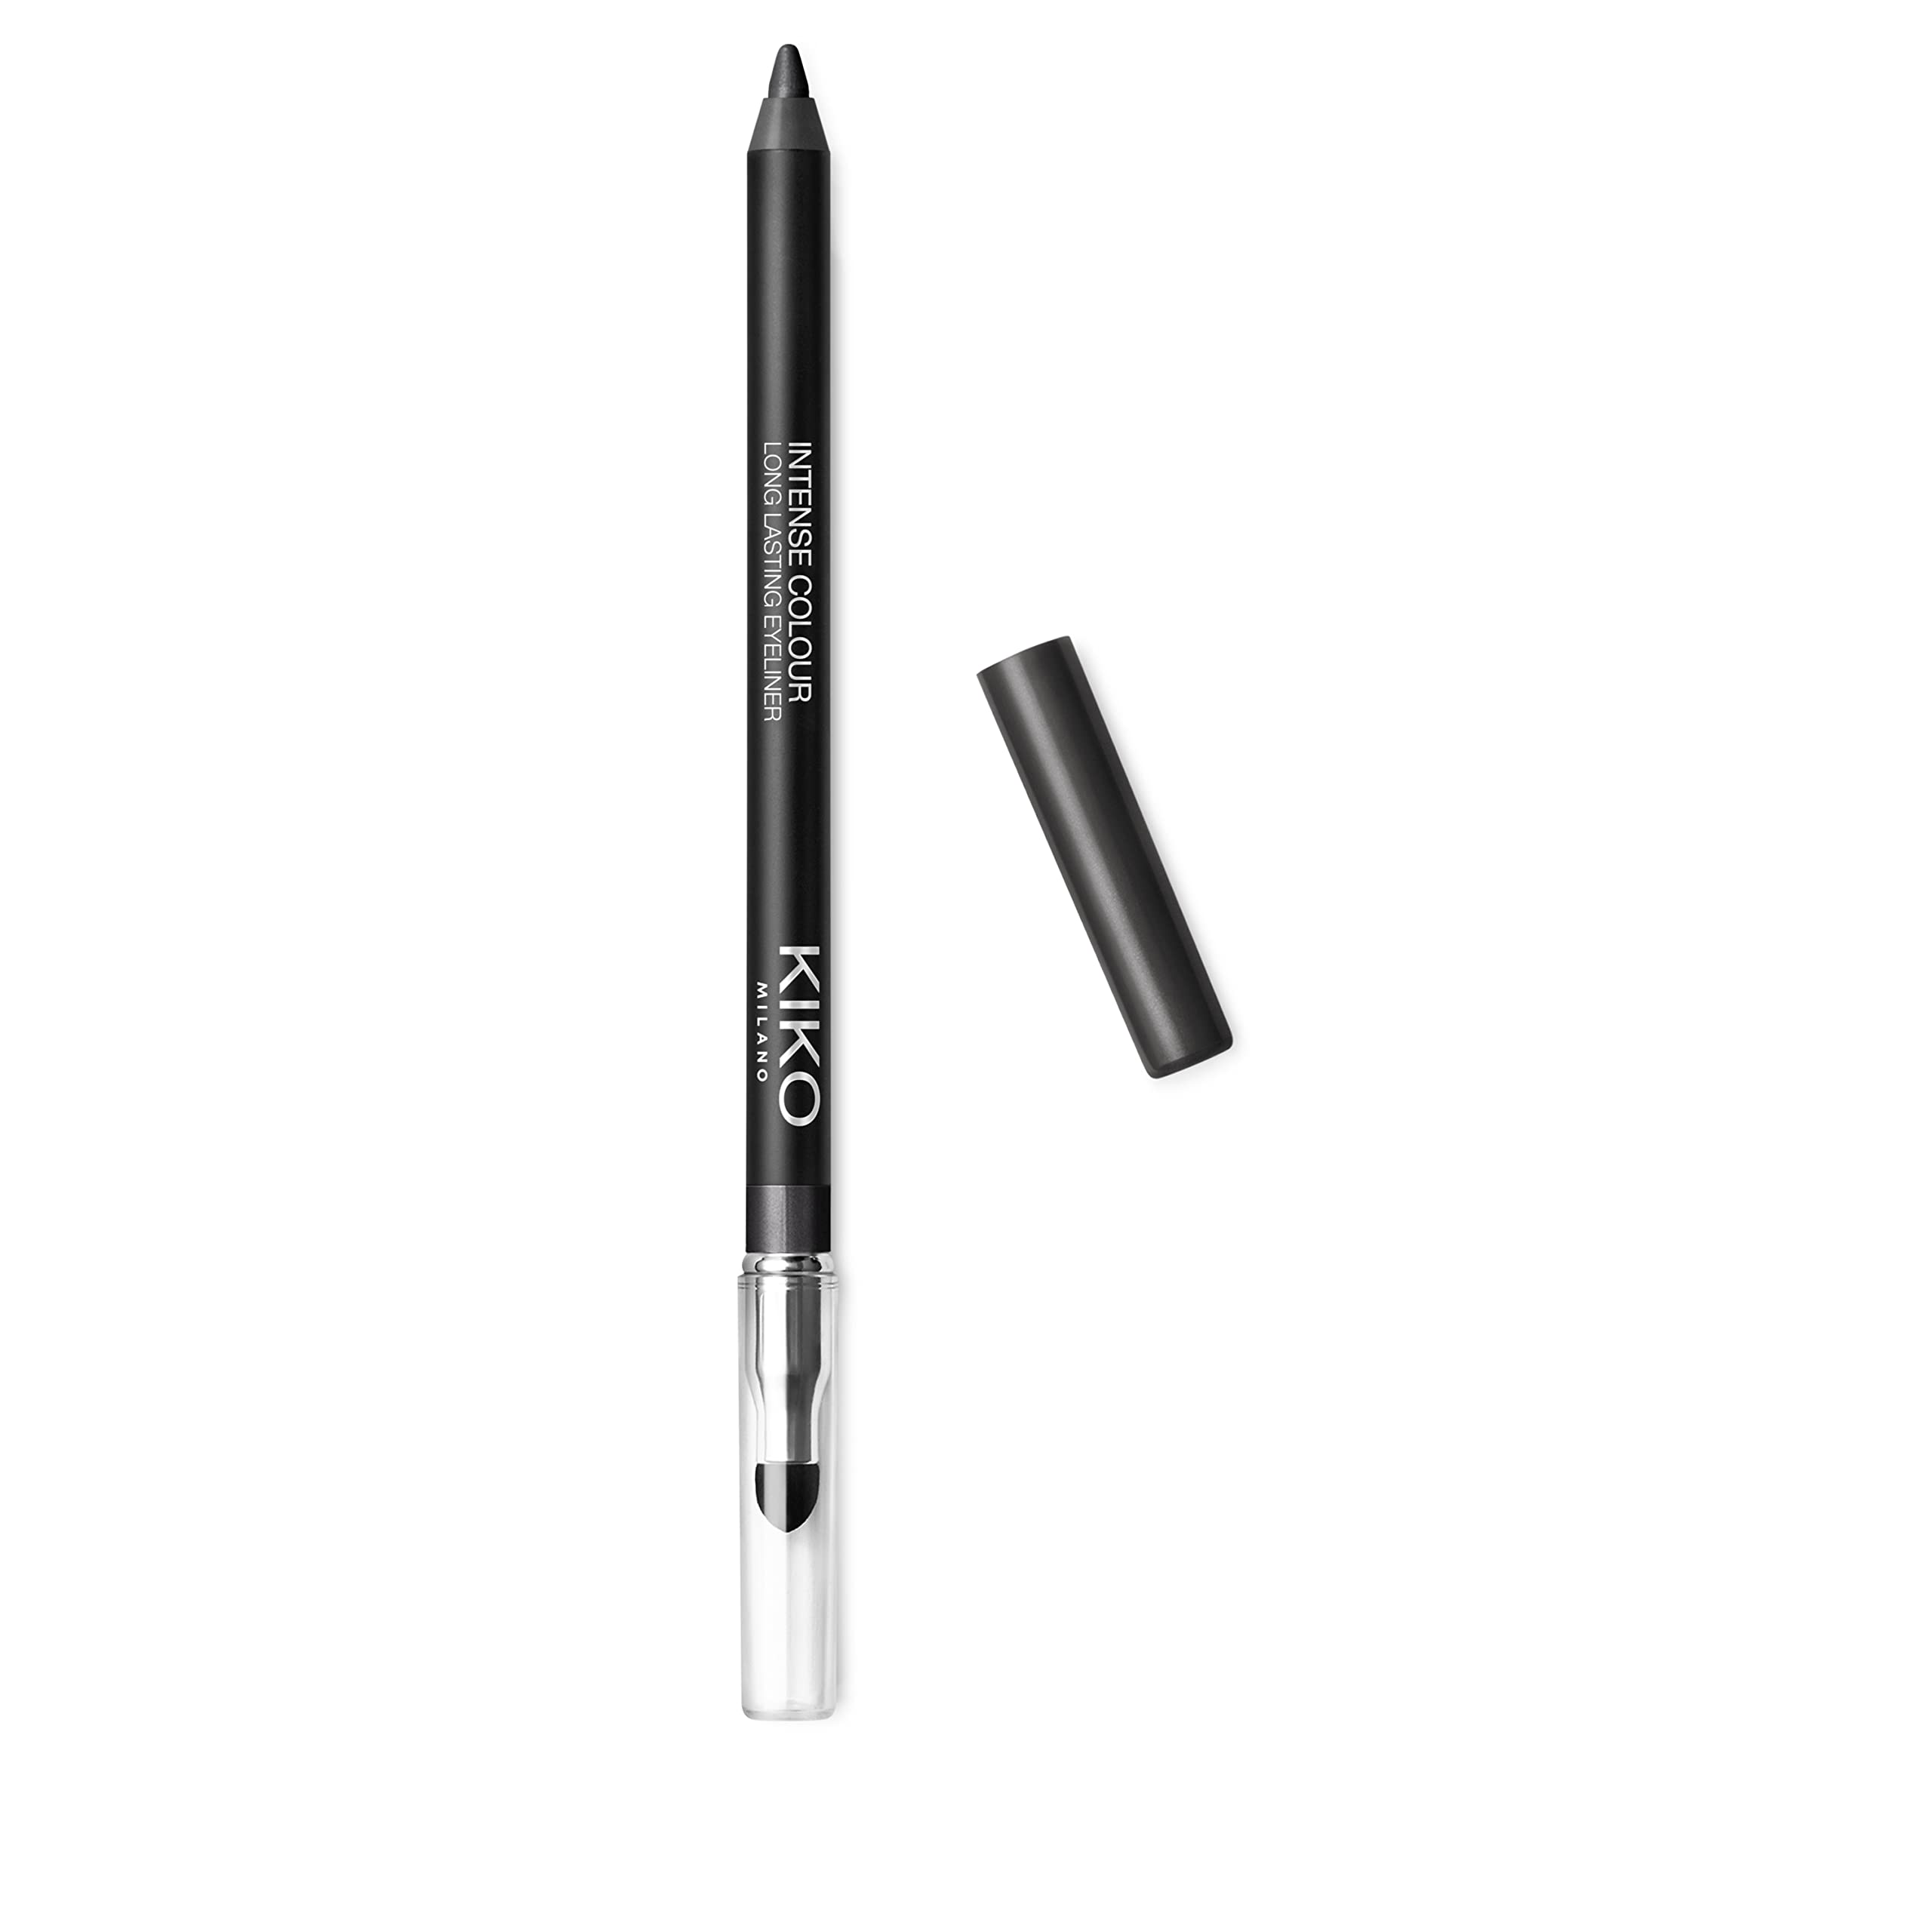 Kiko Milano Intense colour Long Lasting Eyeliner 21  Intense And Smooth-gliding Outer Eye Pencil With Long Wear